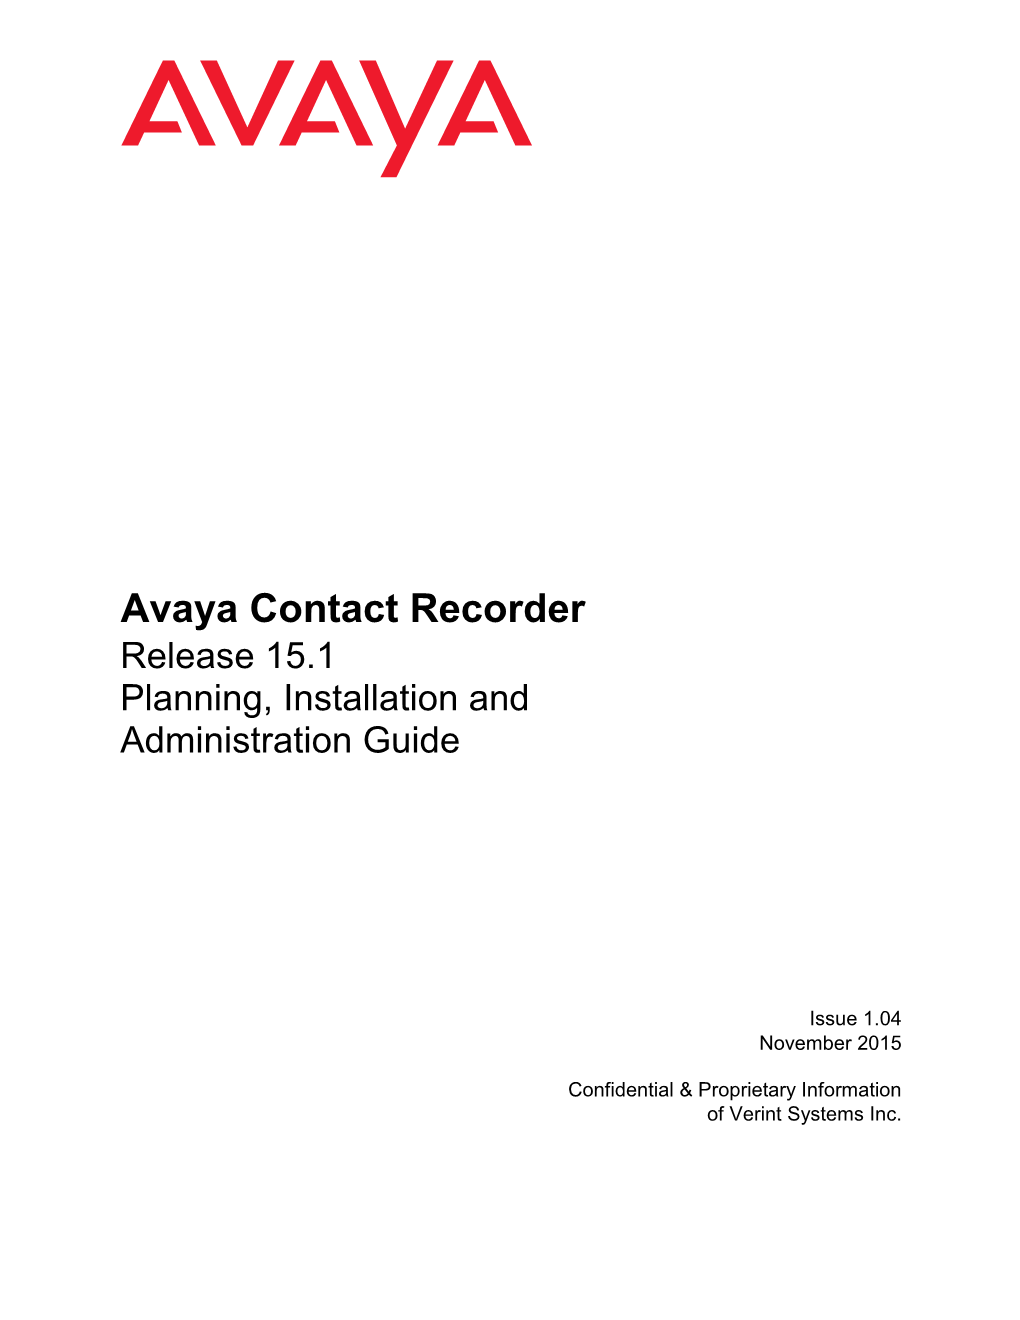 Avaya Contact Recorder Release 15.1 Planning, Installation and Administration Guide